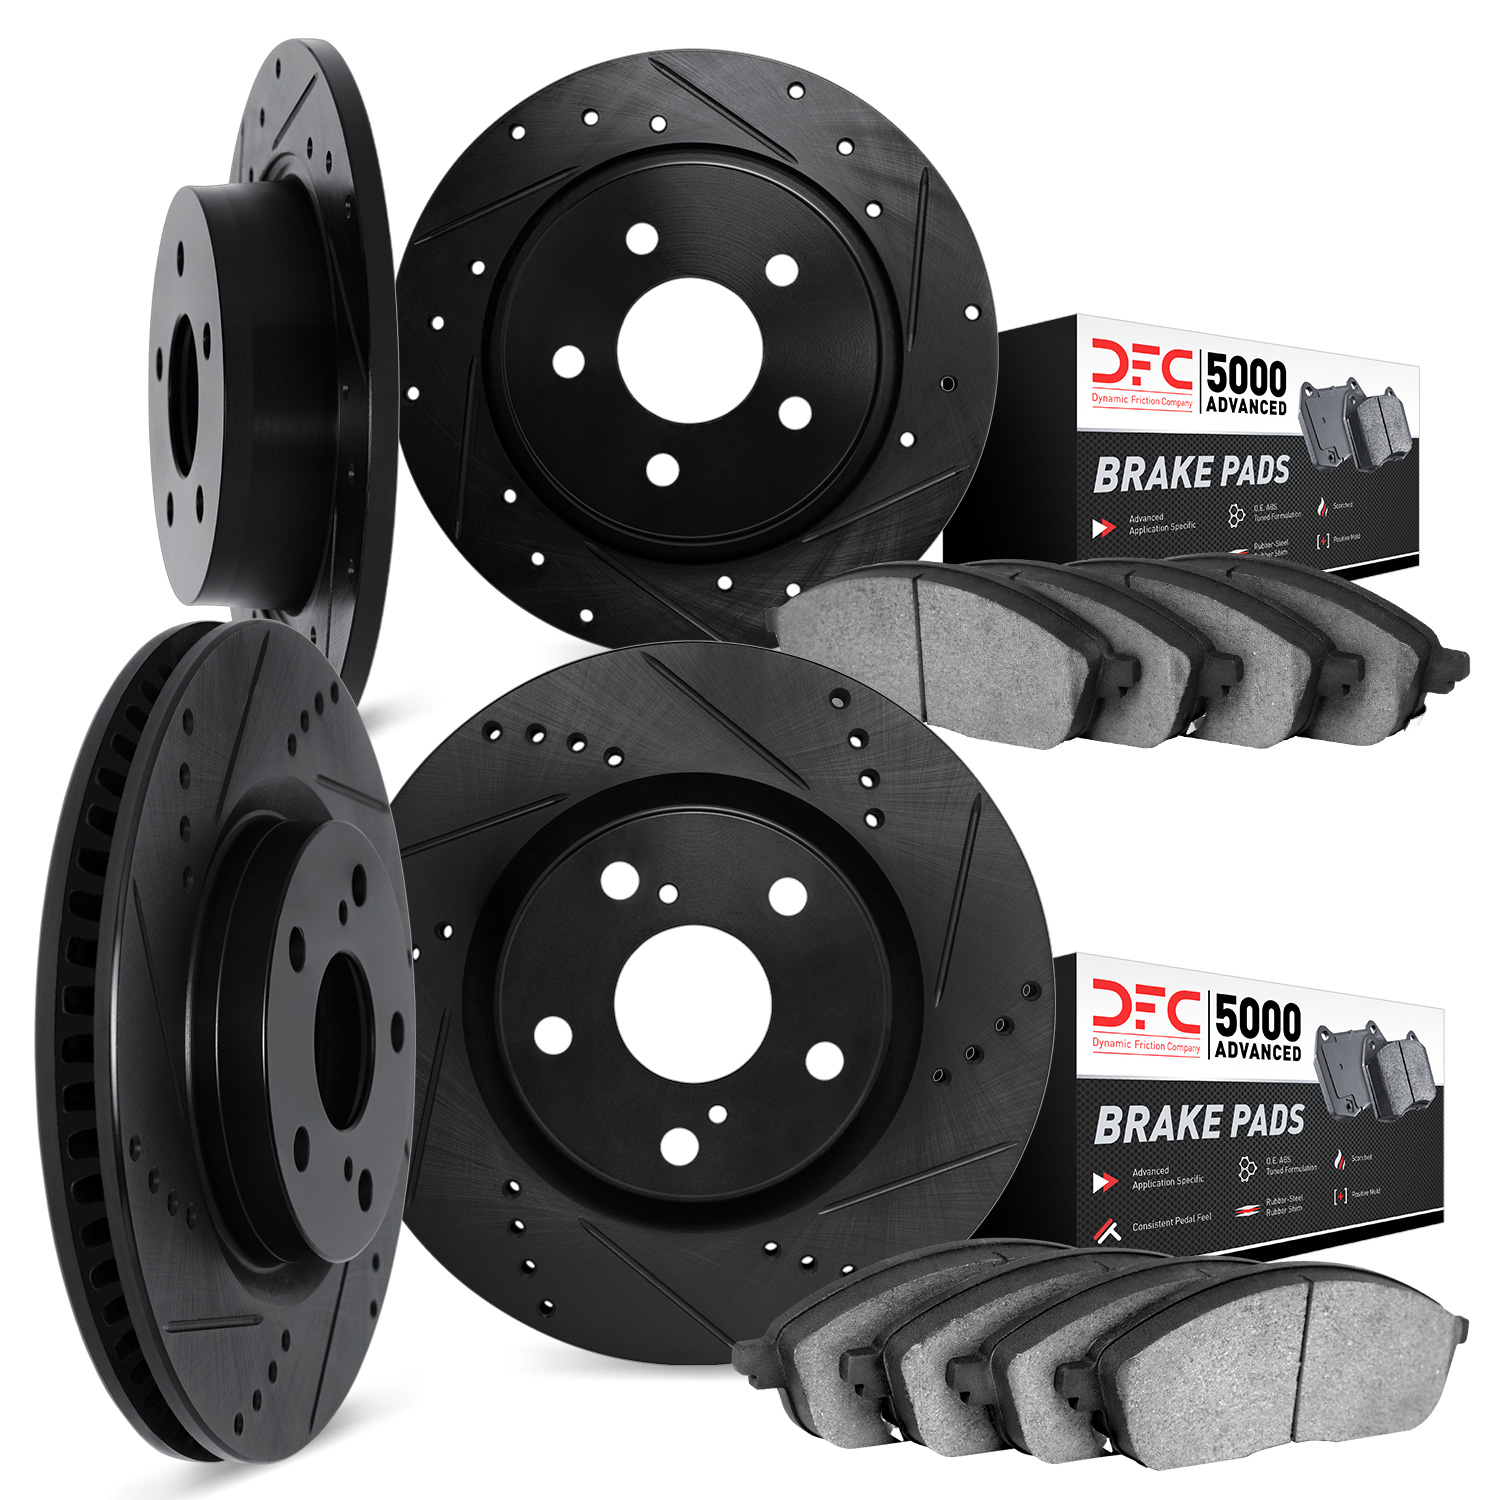 8504-11016 Drilled/Slotted Brake Rotors w/5000 Advanced Brake Pads Kit [Black], 2016-2019 Land Rover, Position: Front and Rear